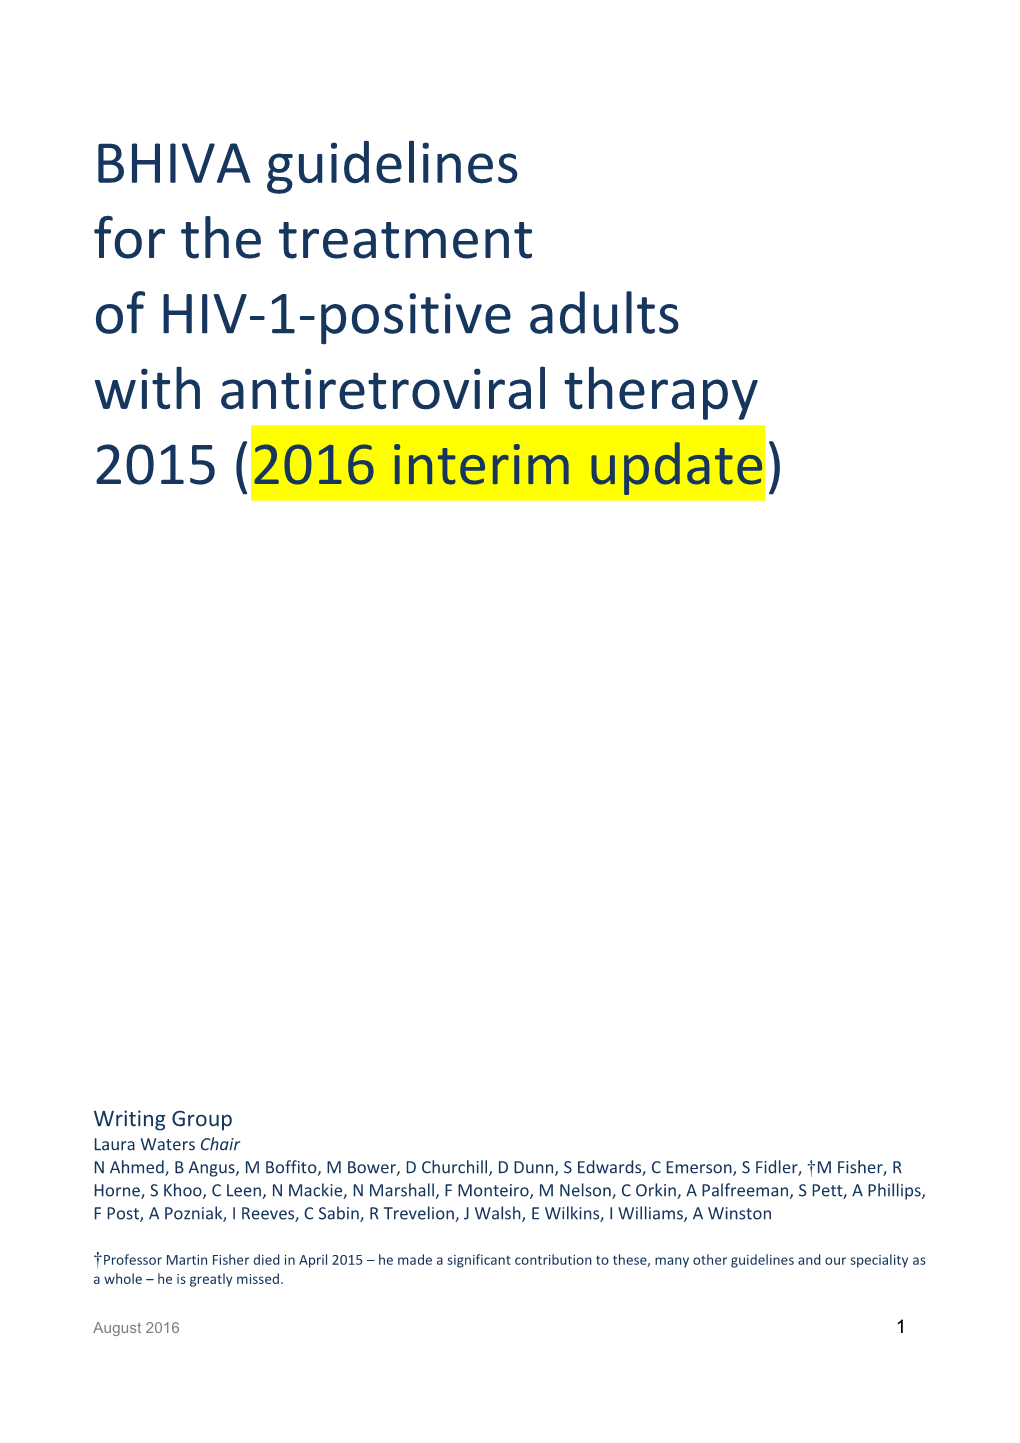 1-Positive Adults with Antiretroviral Therapy 2015 (2016 Interim Update)